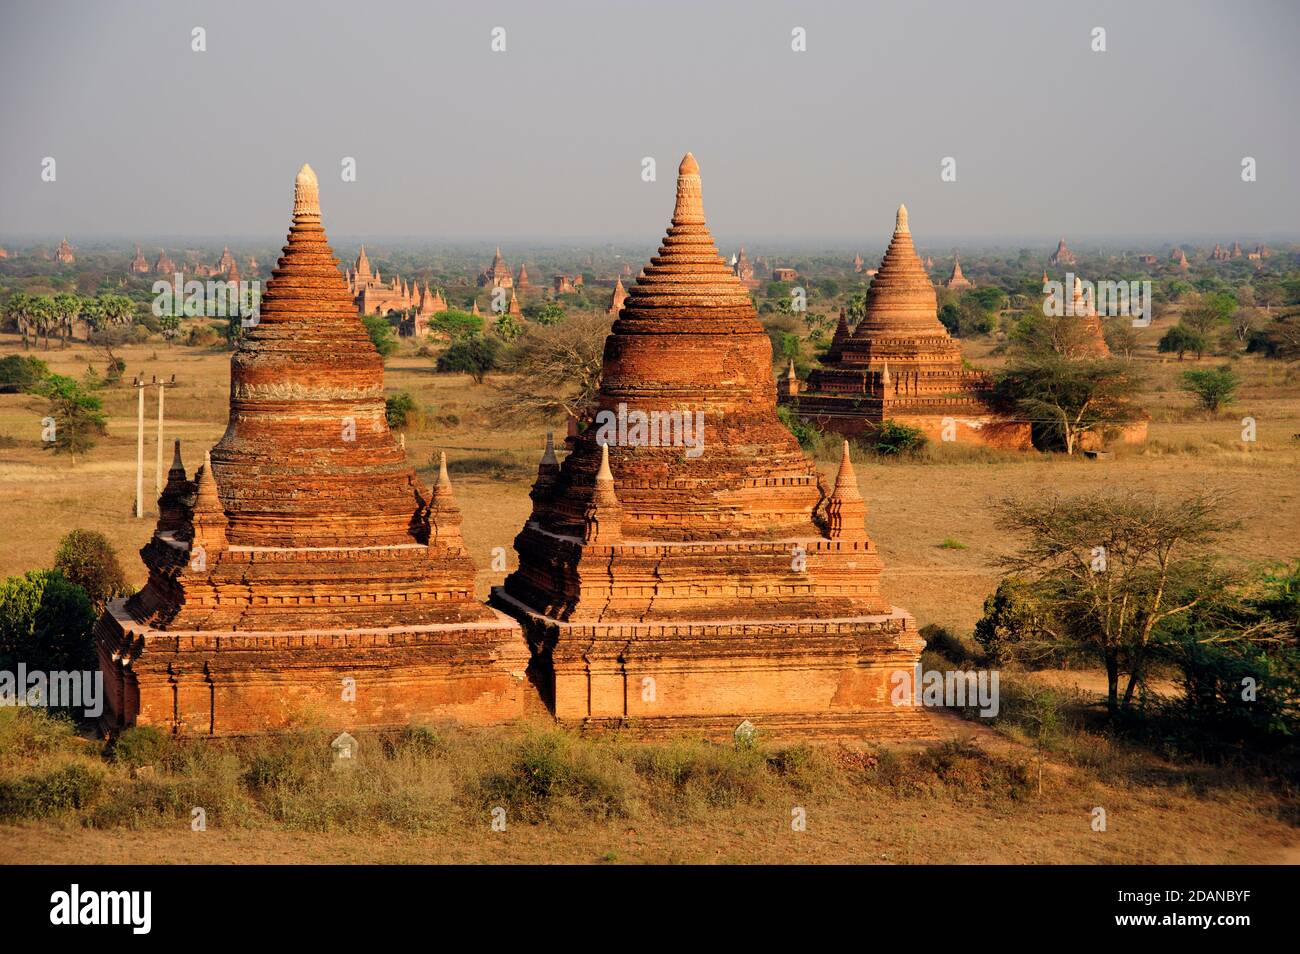 Two brick temple structures on the temple studded dusty plain of ancient Bagan Myanmar Stock Photo